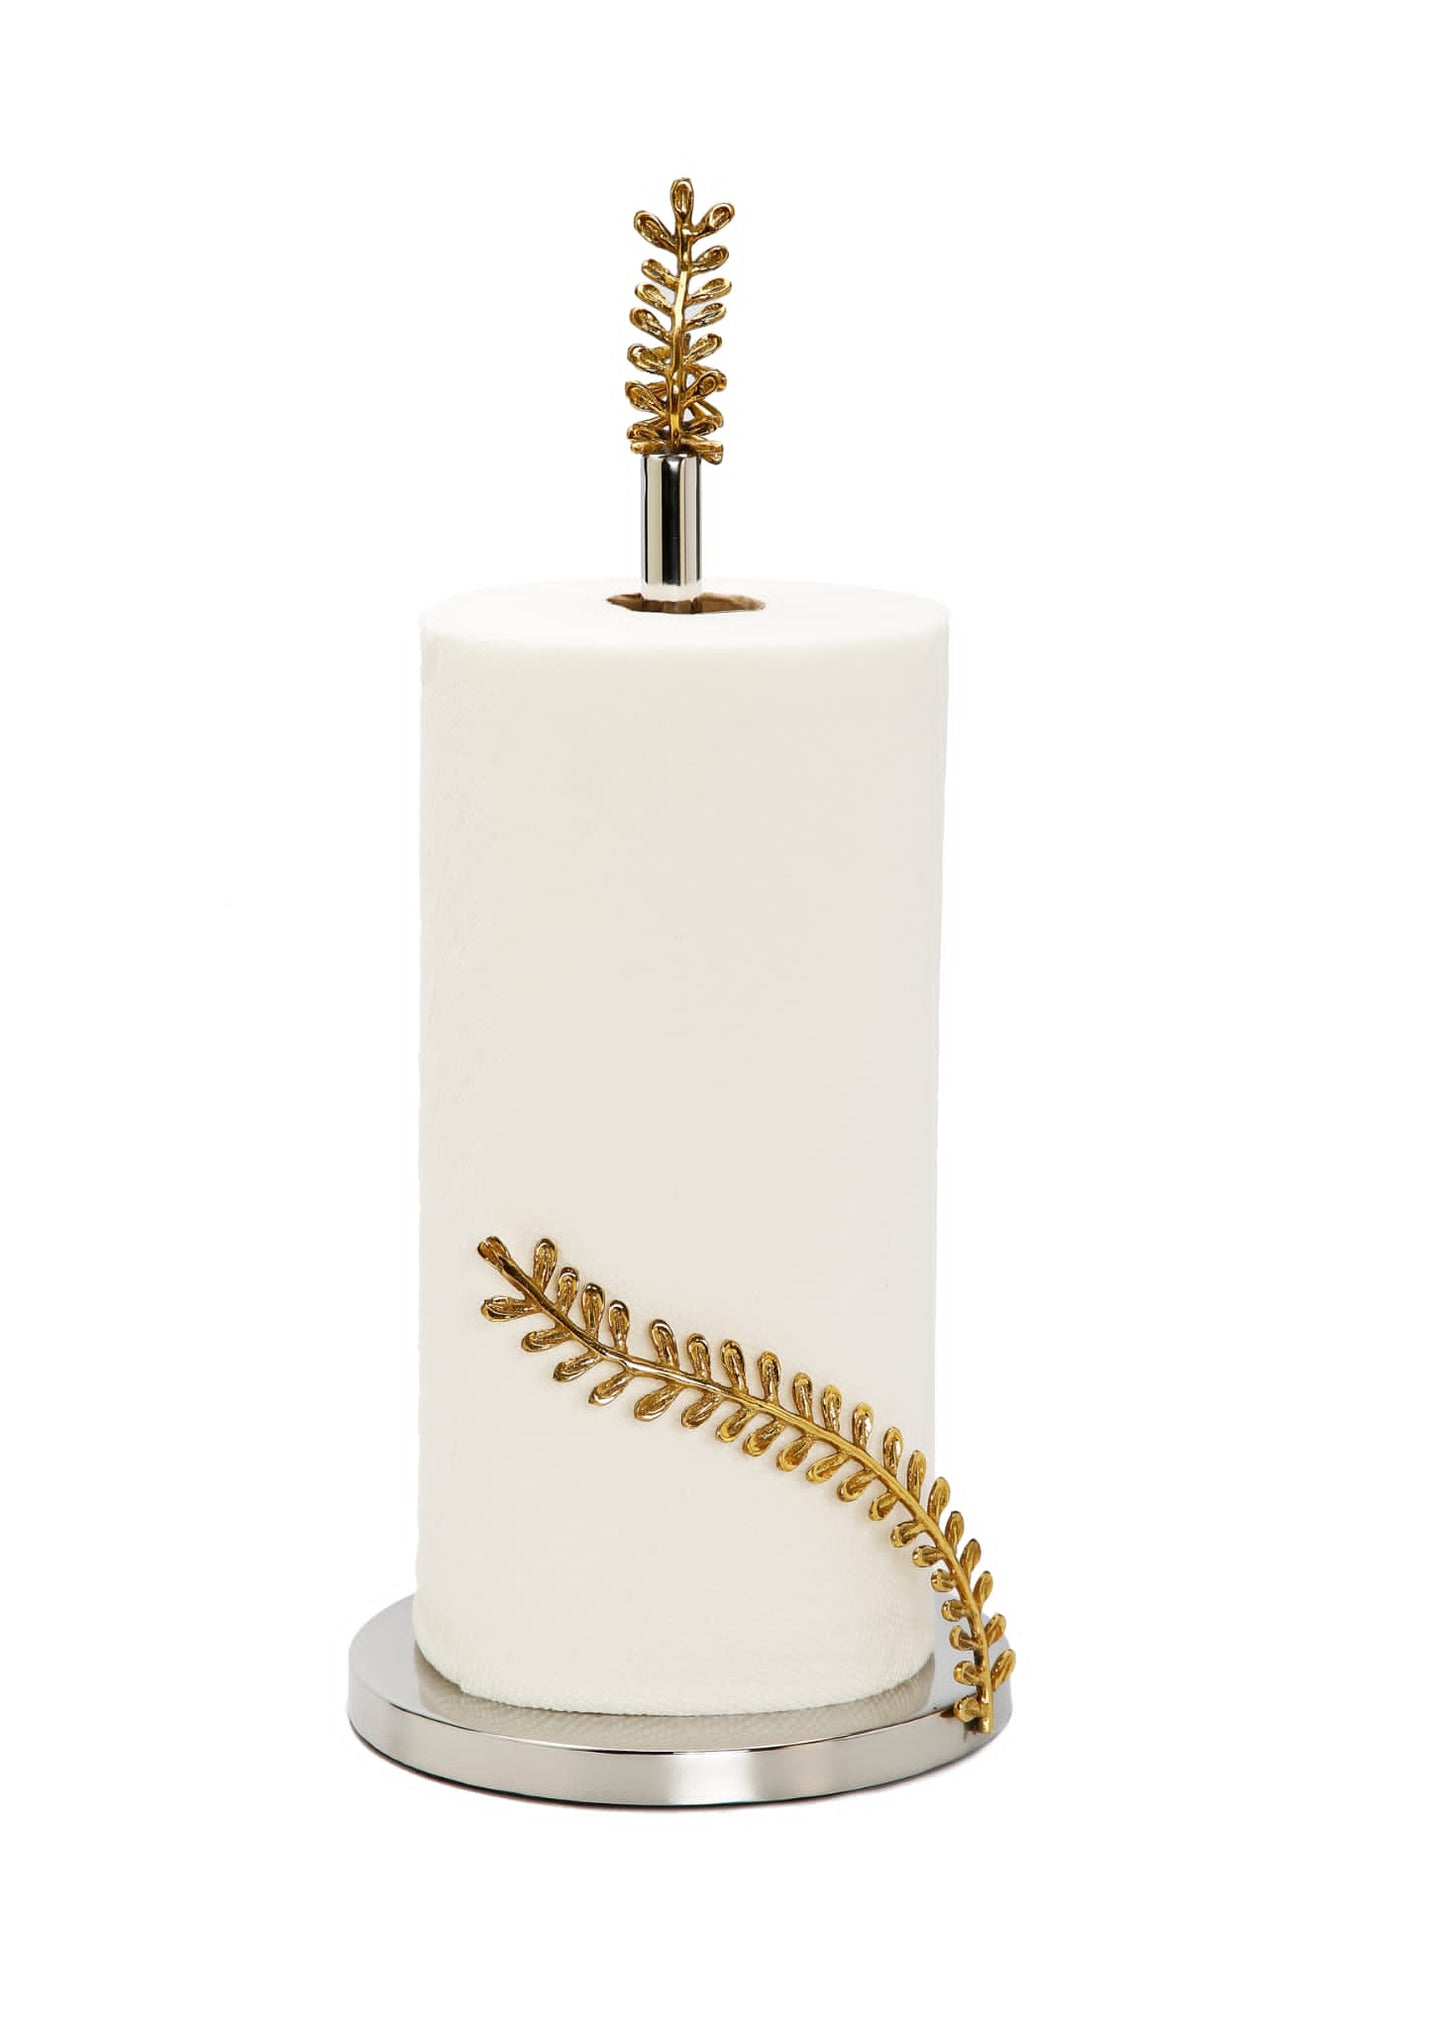 Gold and Silver Base with Vine Details Paper Towel Holder